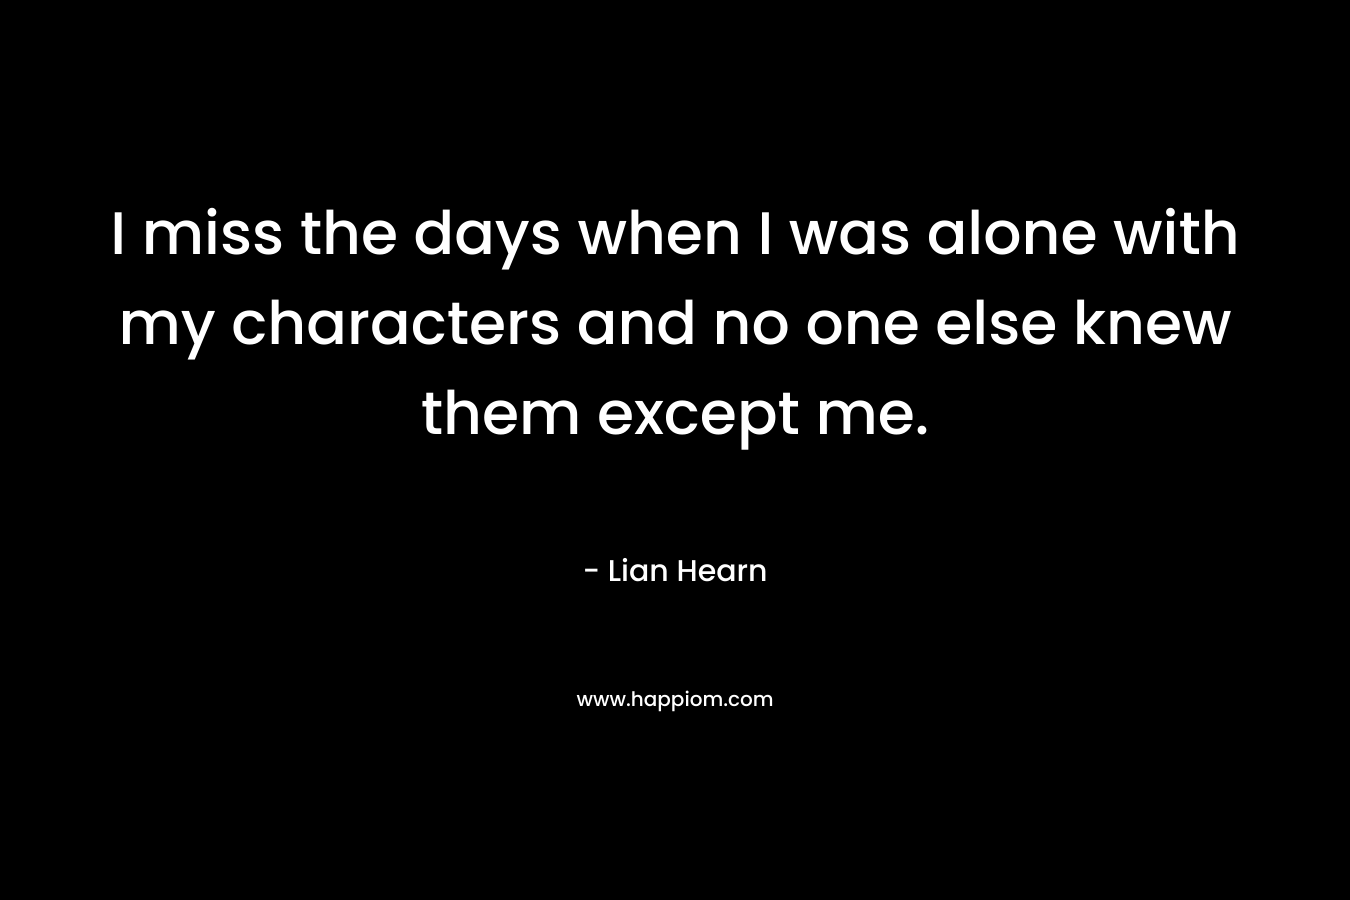 I miss the days when I was alone with my characters and no one else knew them except me. – Lian Hearn